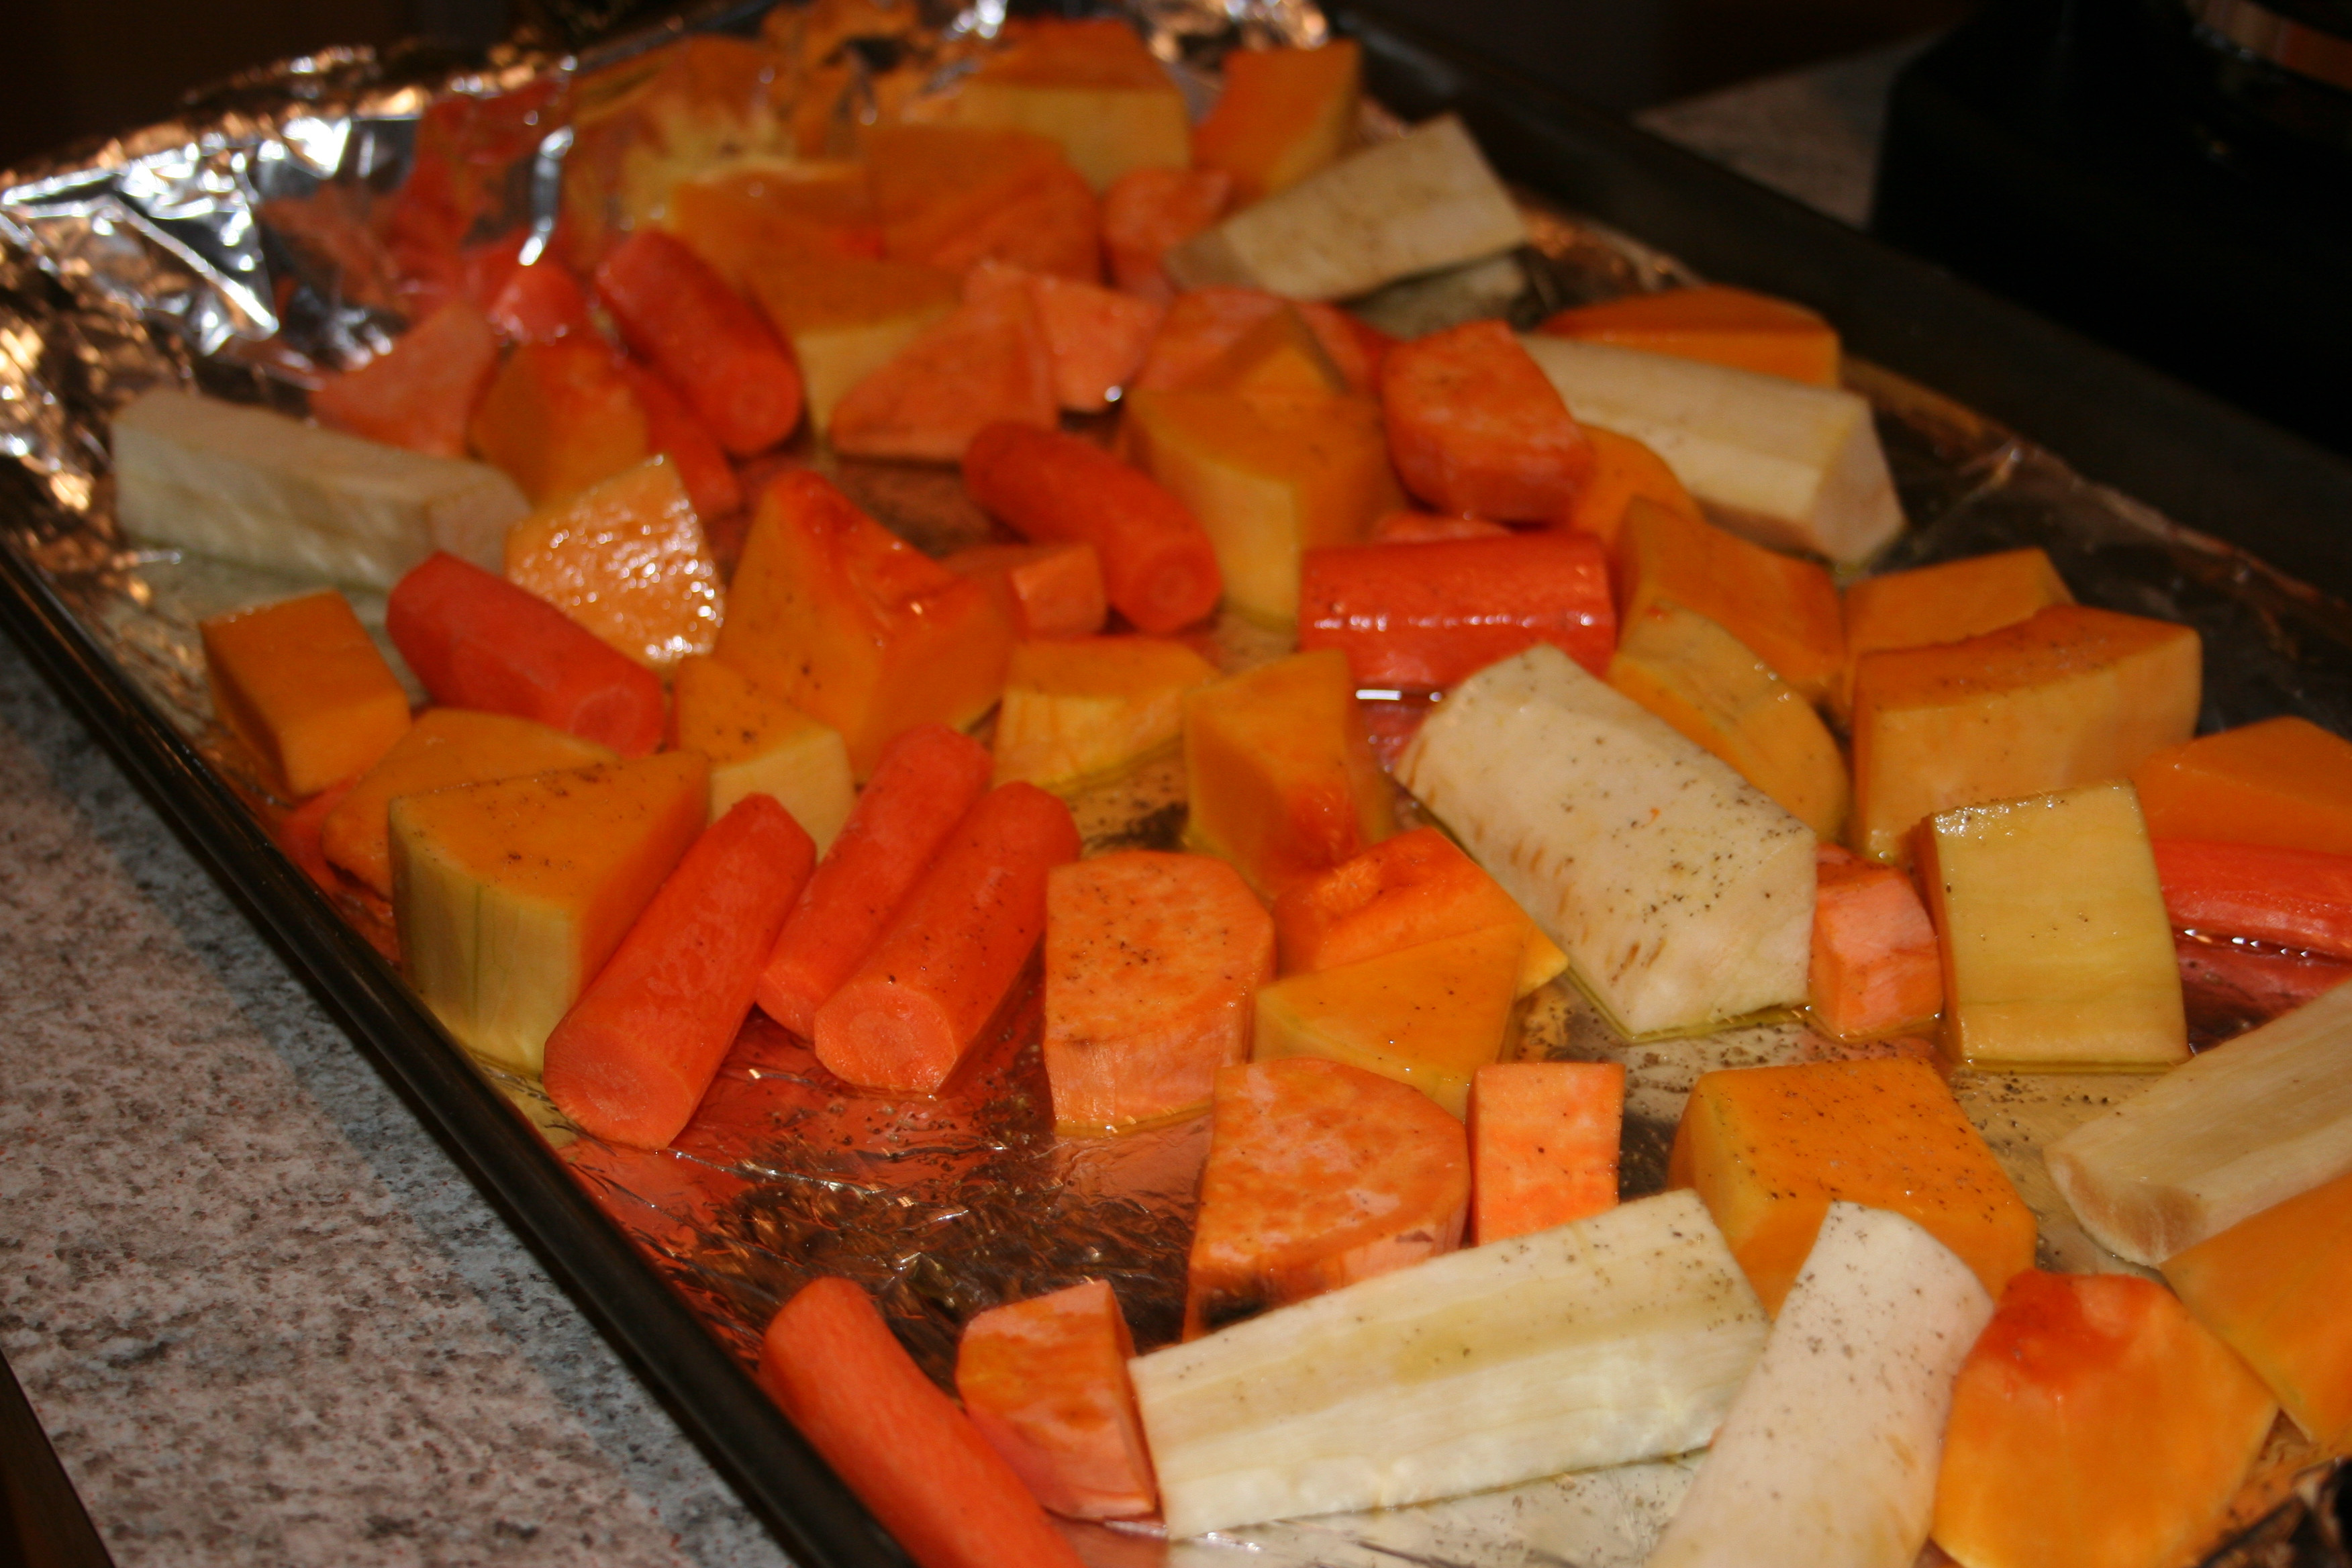 Roasted Root Vegetables Barefoot Contessa
 roasted root ve ables barefoot contessa